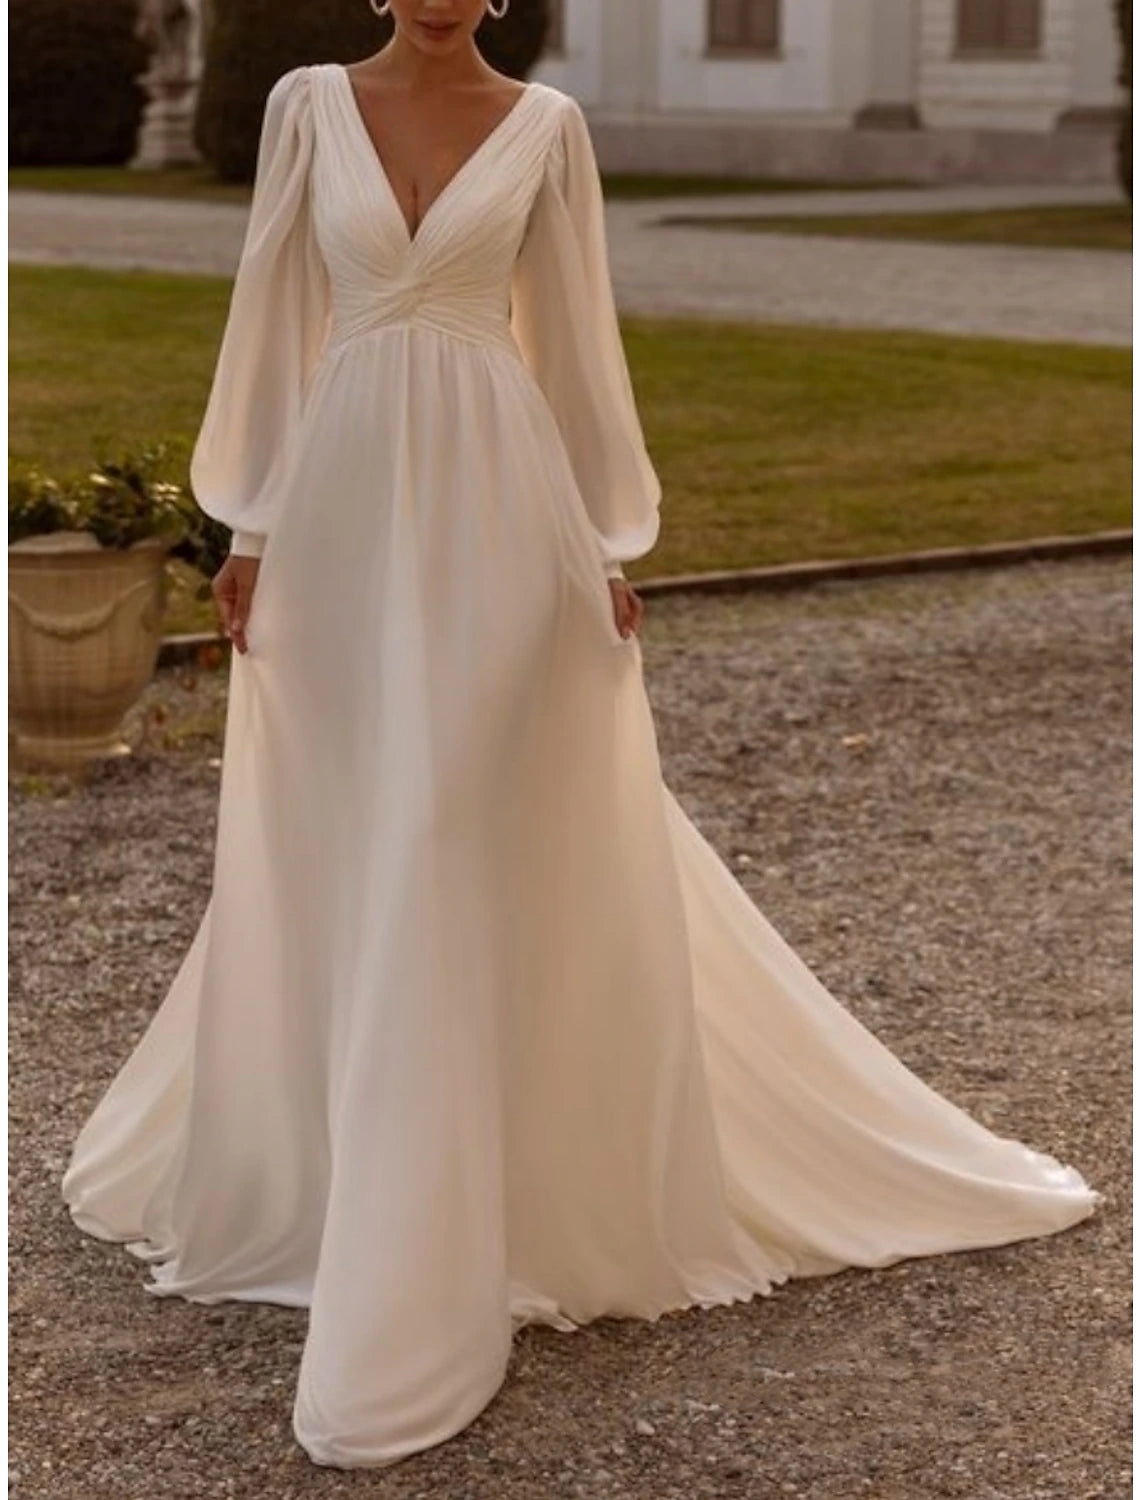 Simple Wedding Dresses Wedding Dresses A-Line Camisole Sleeveless Tea Length Chiffon Bridal Gowns With Pleats Solid Color